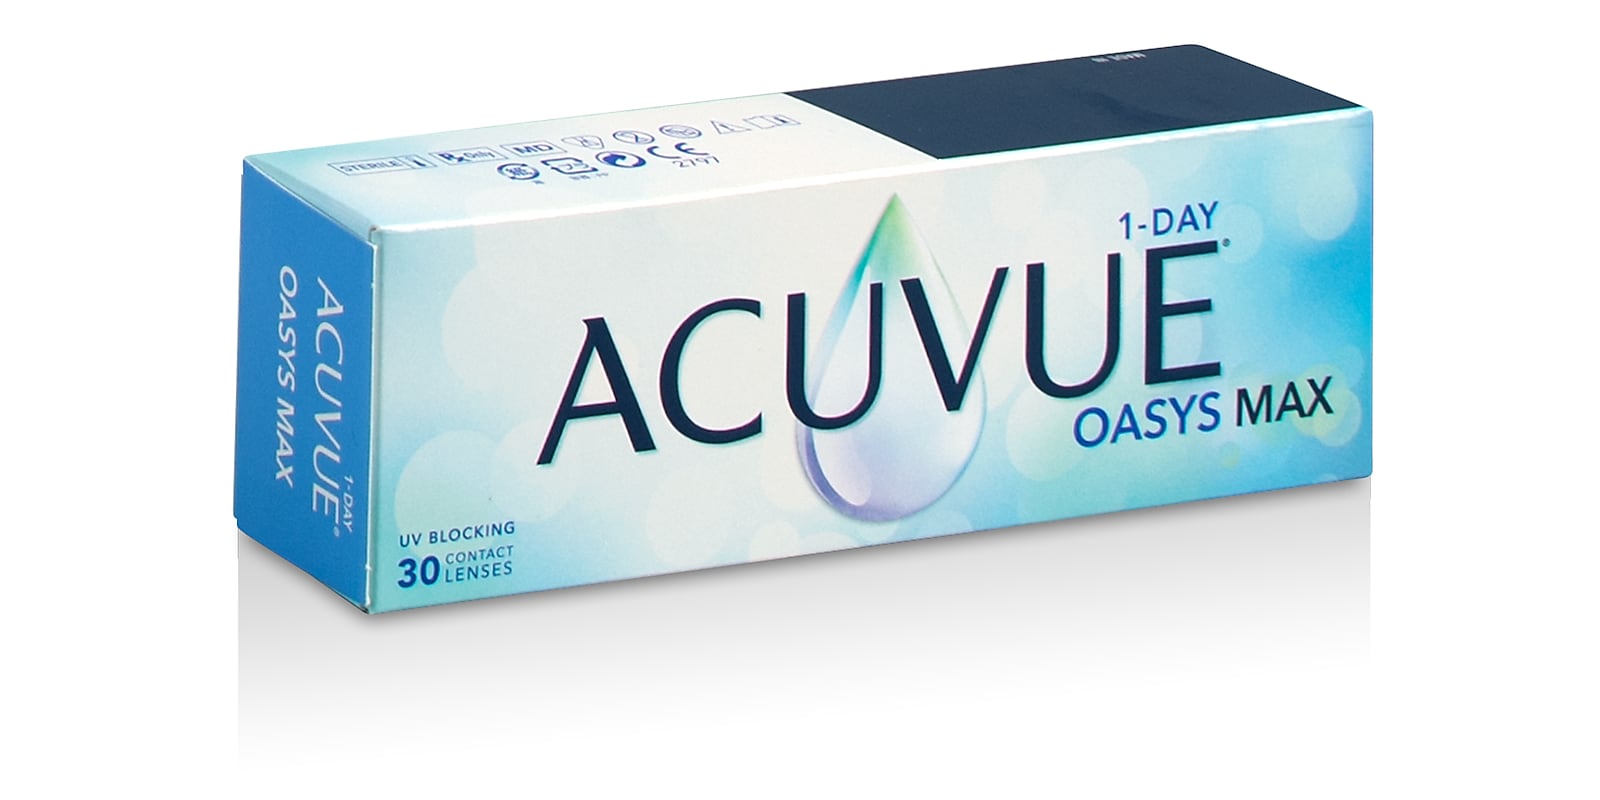 Johnson & Johnson - Acuvue® Oasys Max 1-day Sphere, 30 Pack